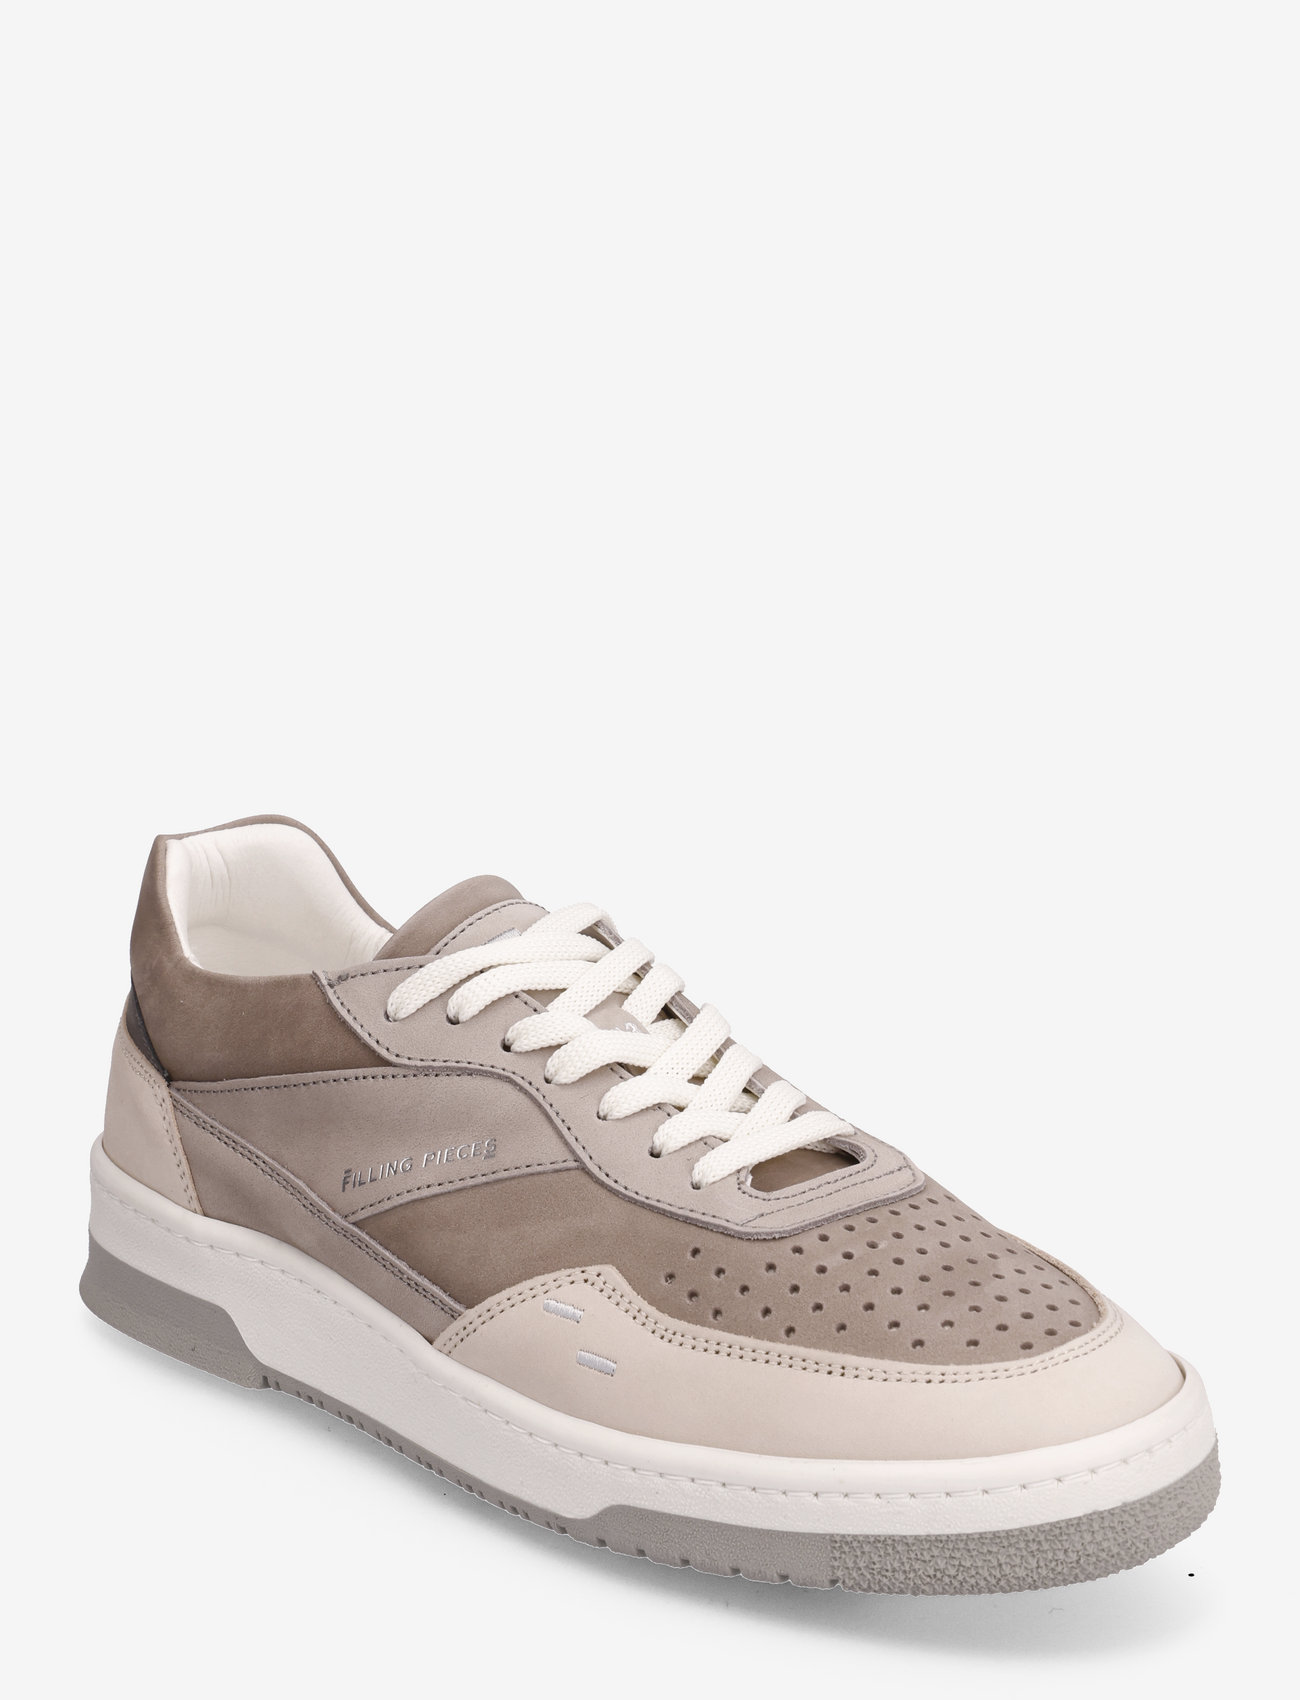 Filling Pieces - Ace Spin Light Grey - låga sneakers - taupe - 0